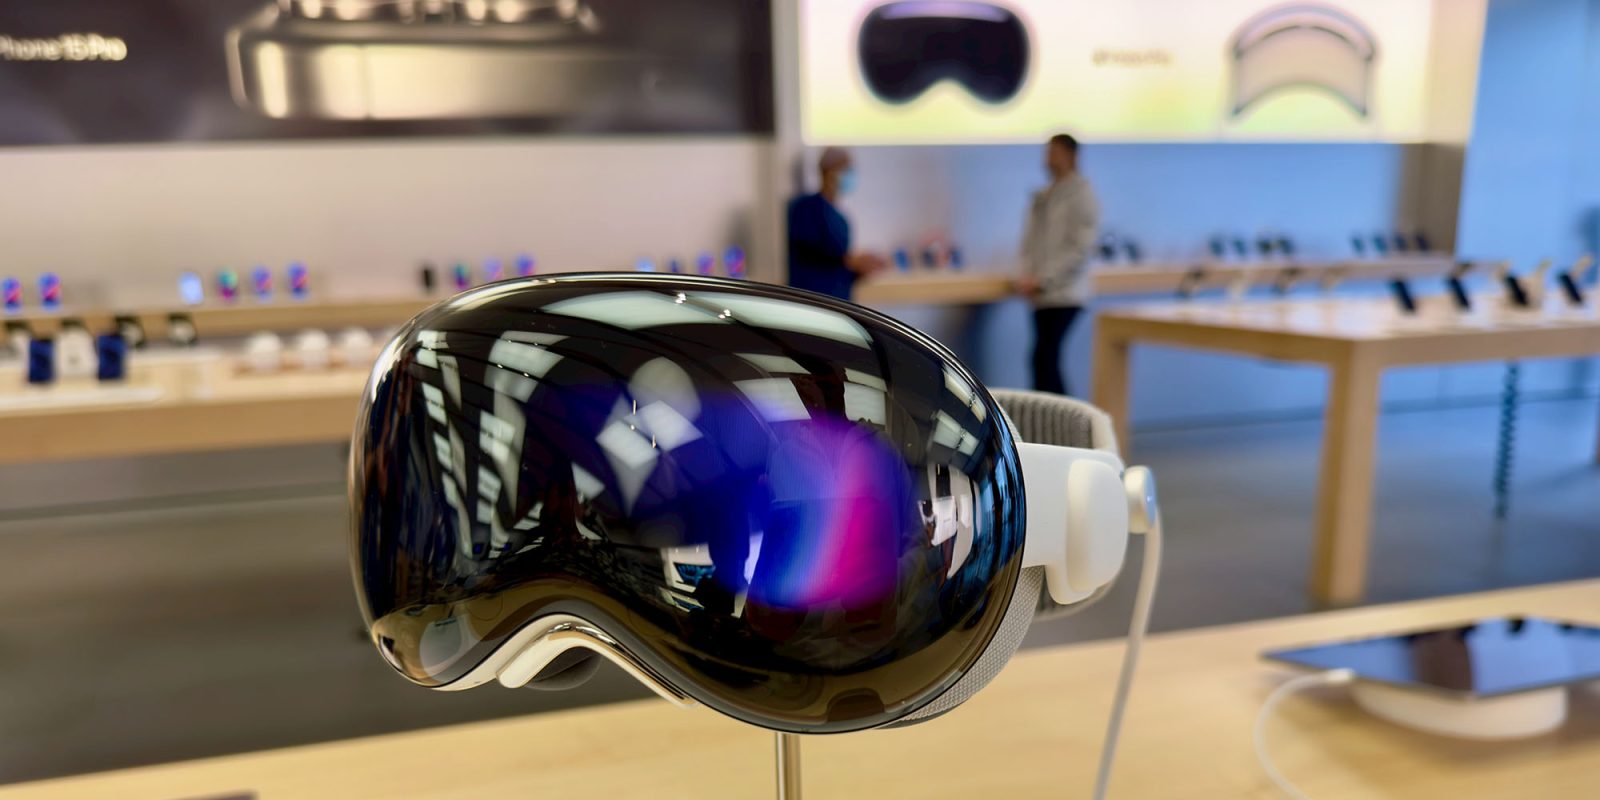 Joanna Stern would not buy Vision Pro | Display model in Apple Store